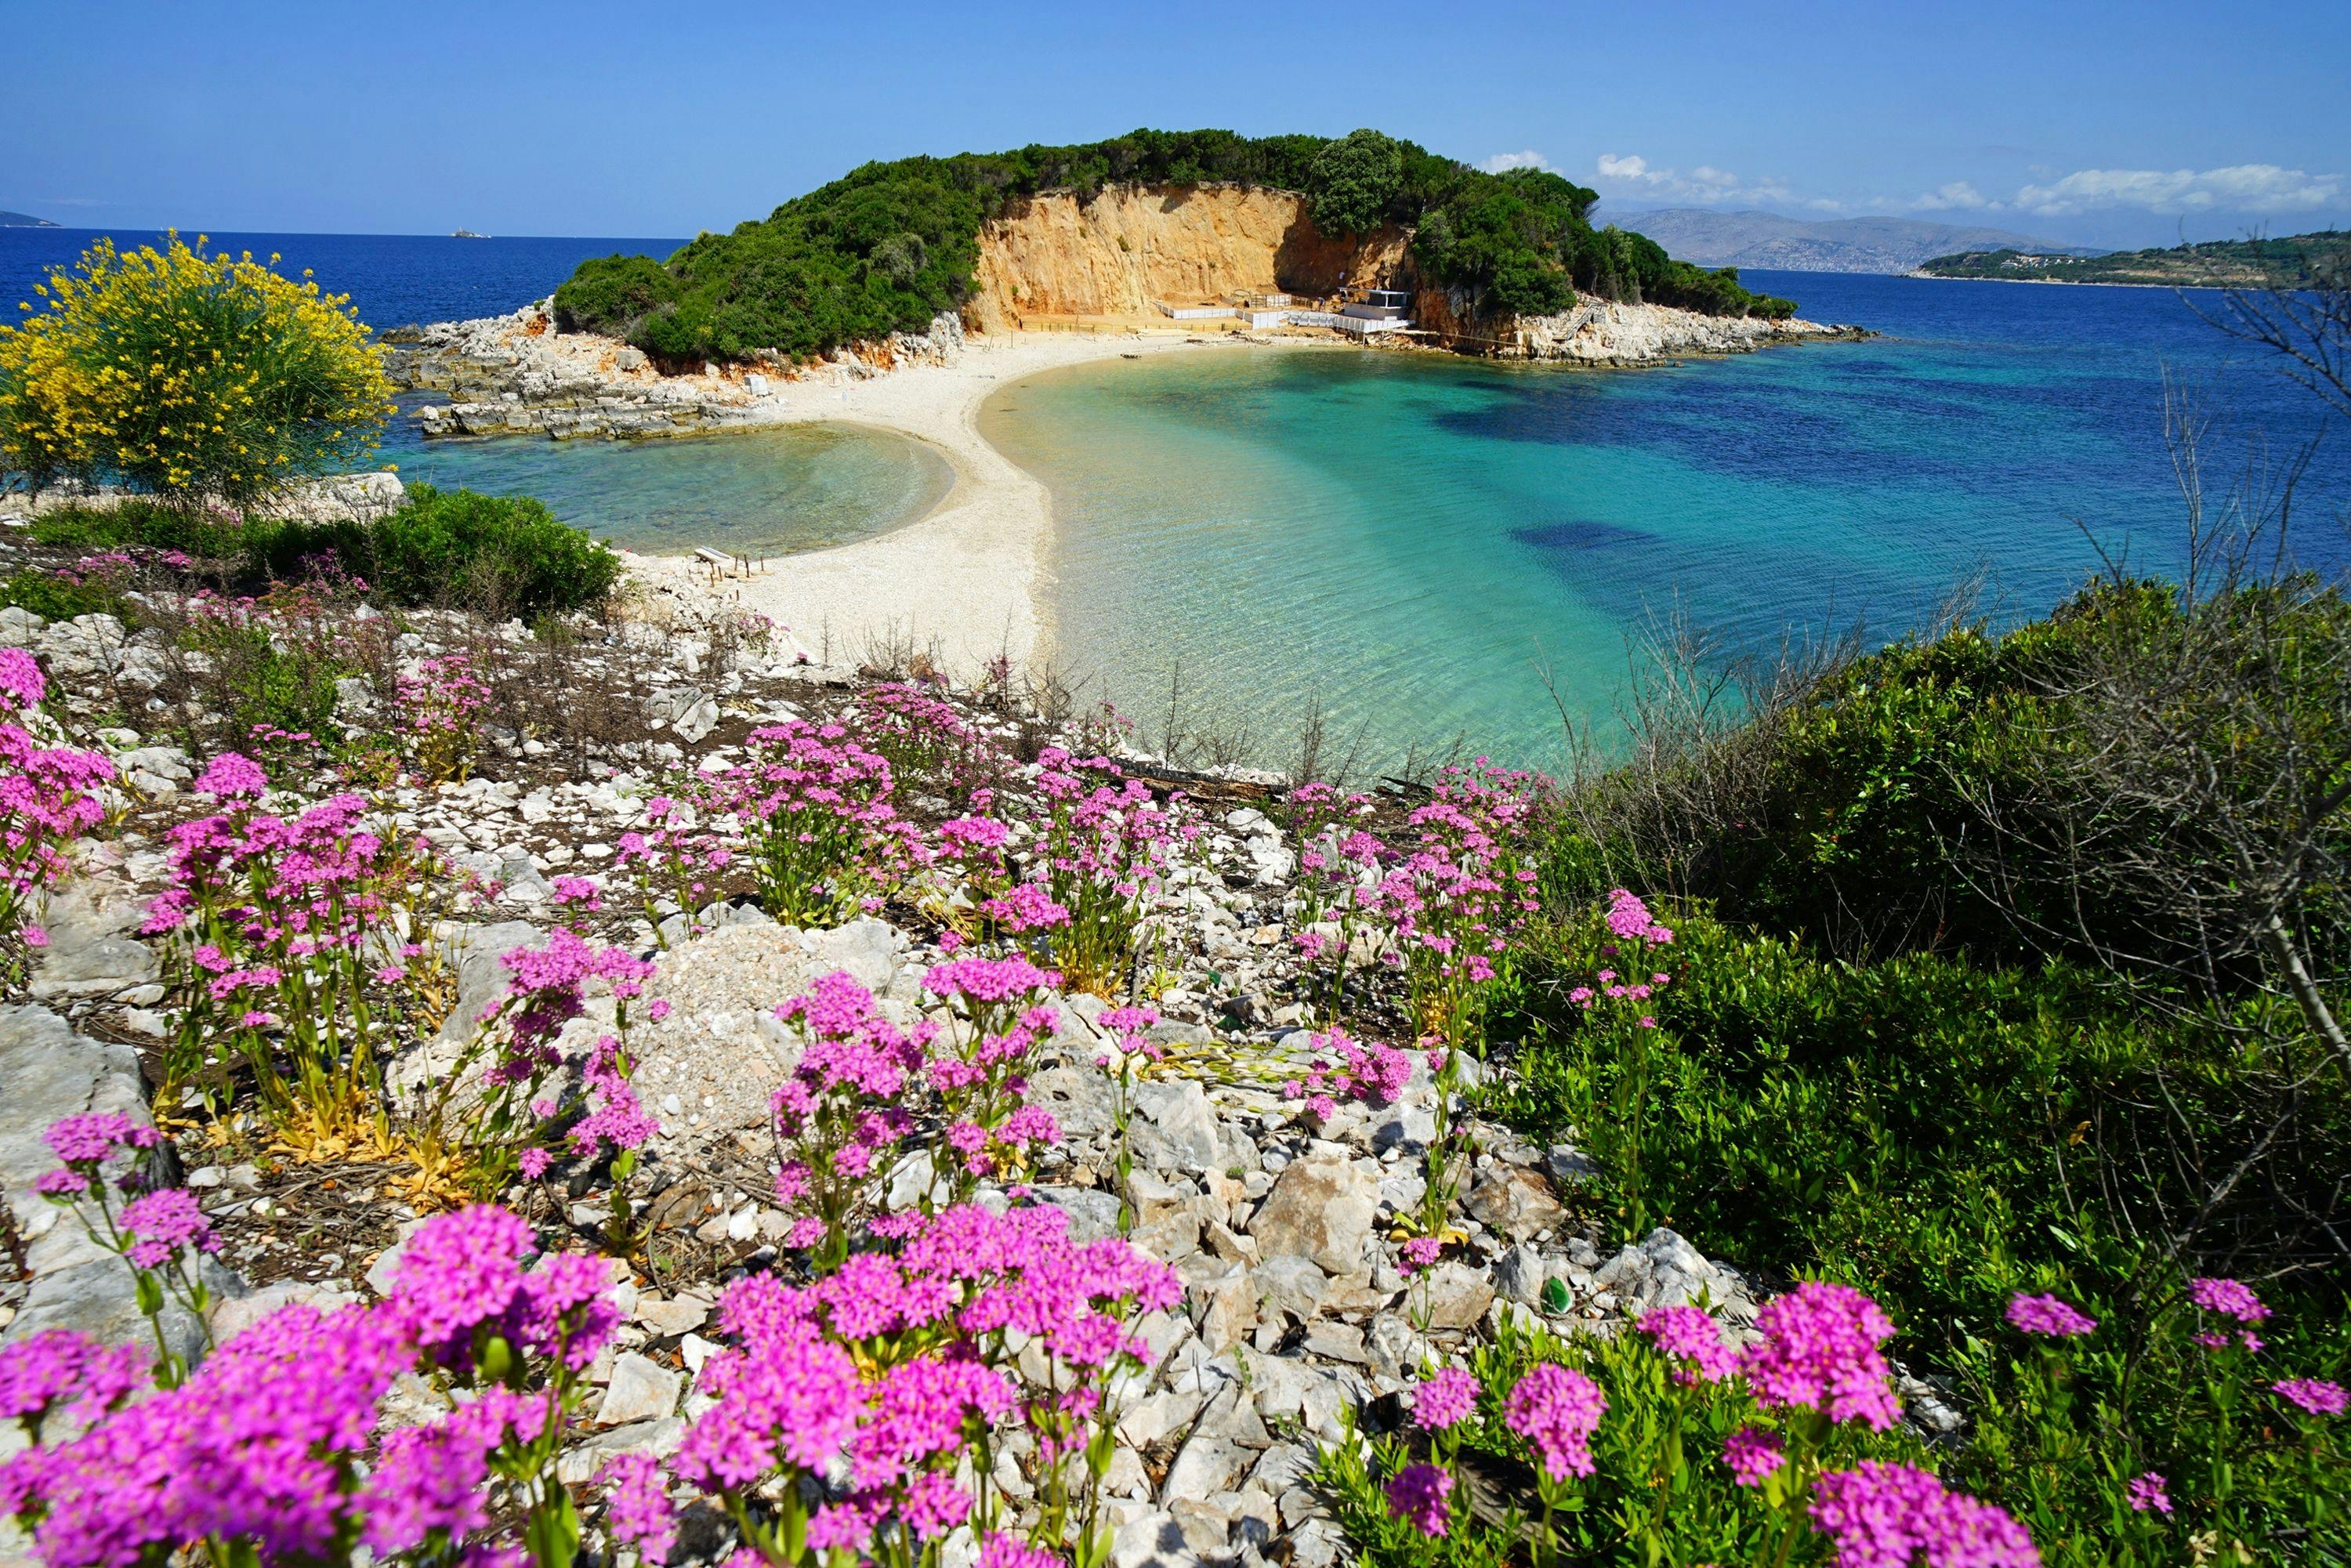 Trending Destination: What to See in Albania - Ksamil - RatePunk